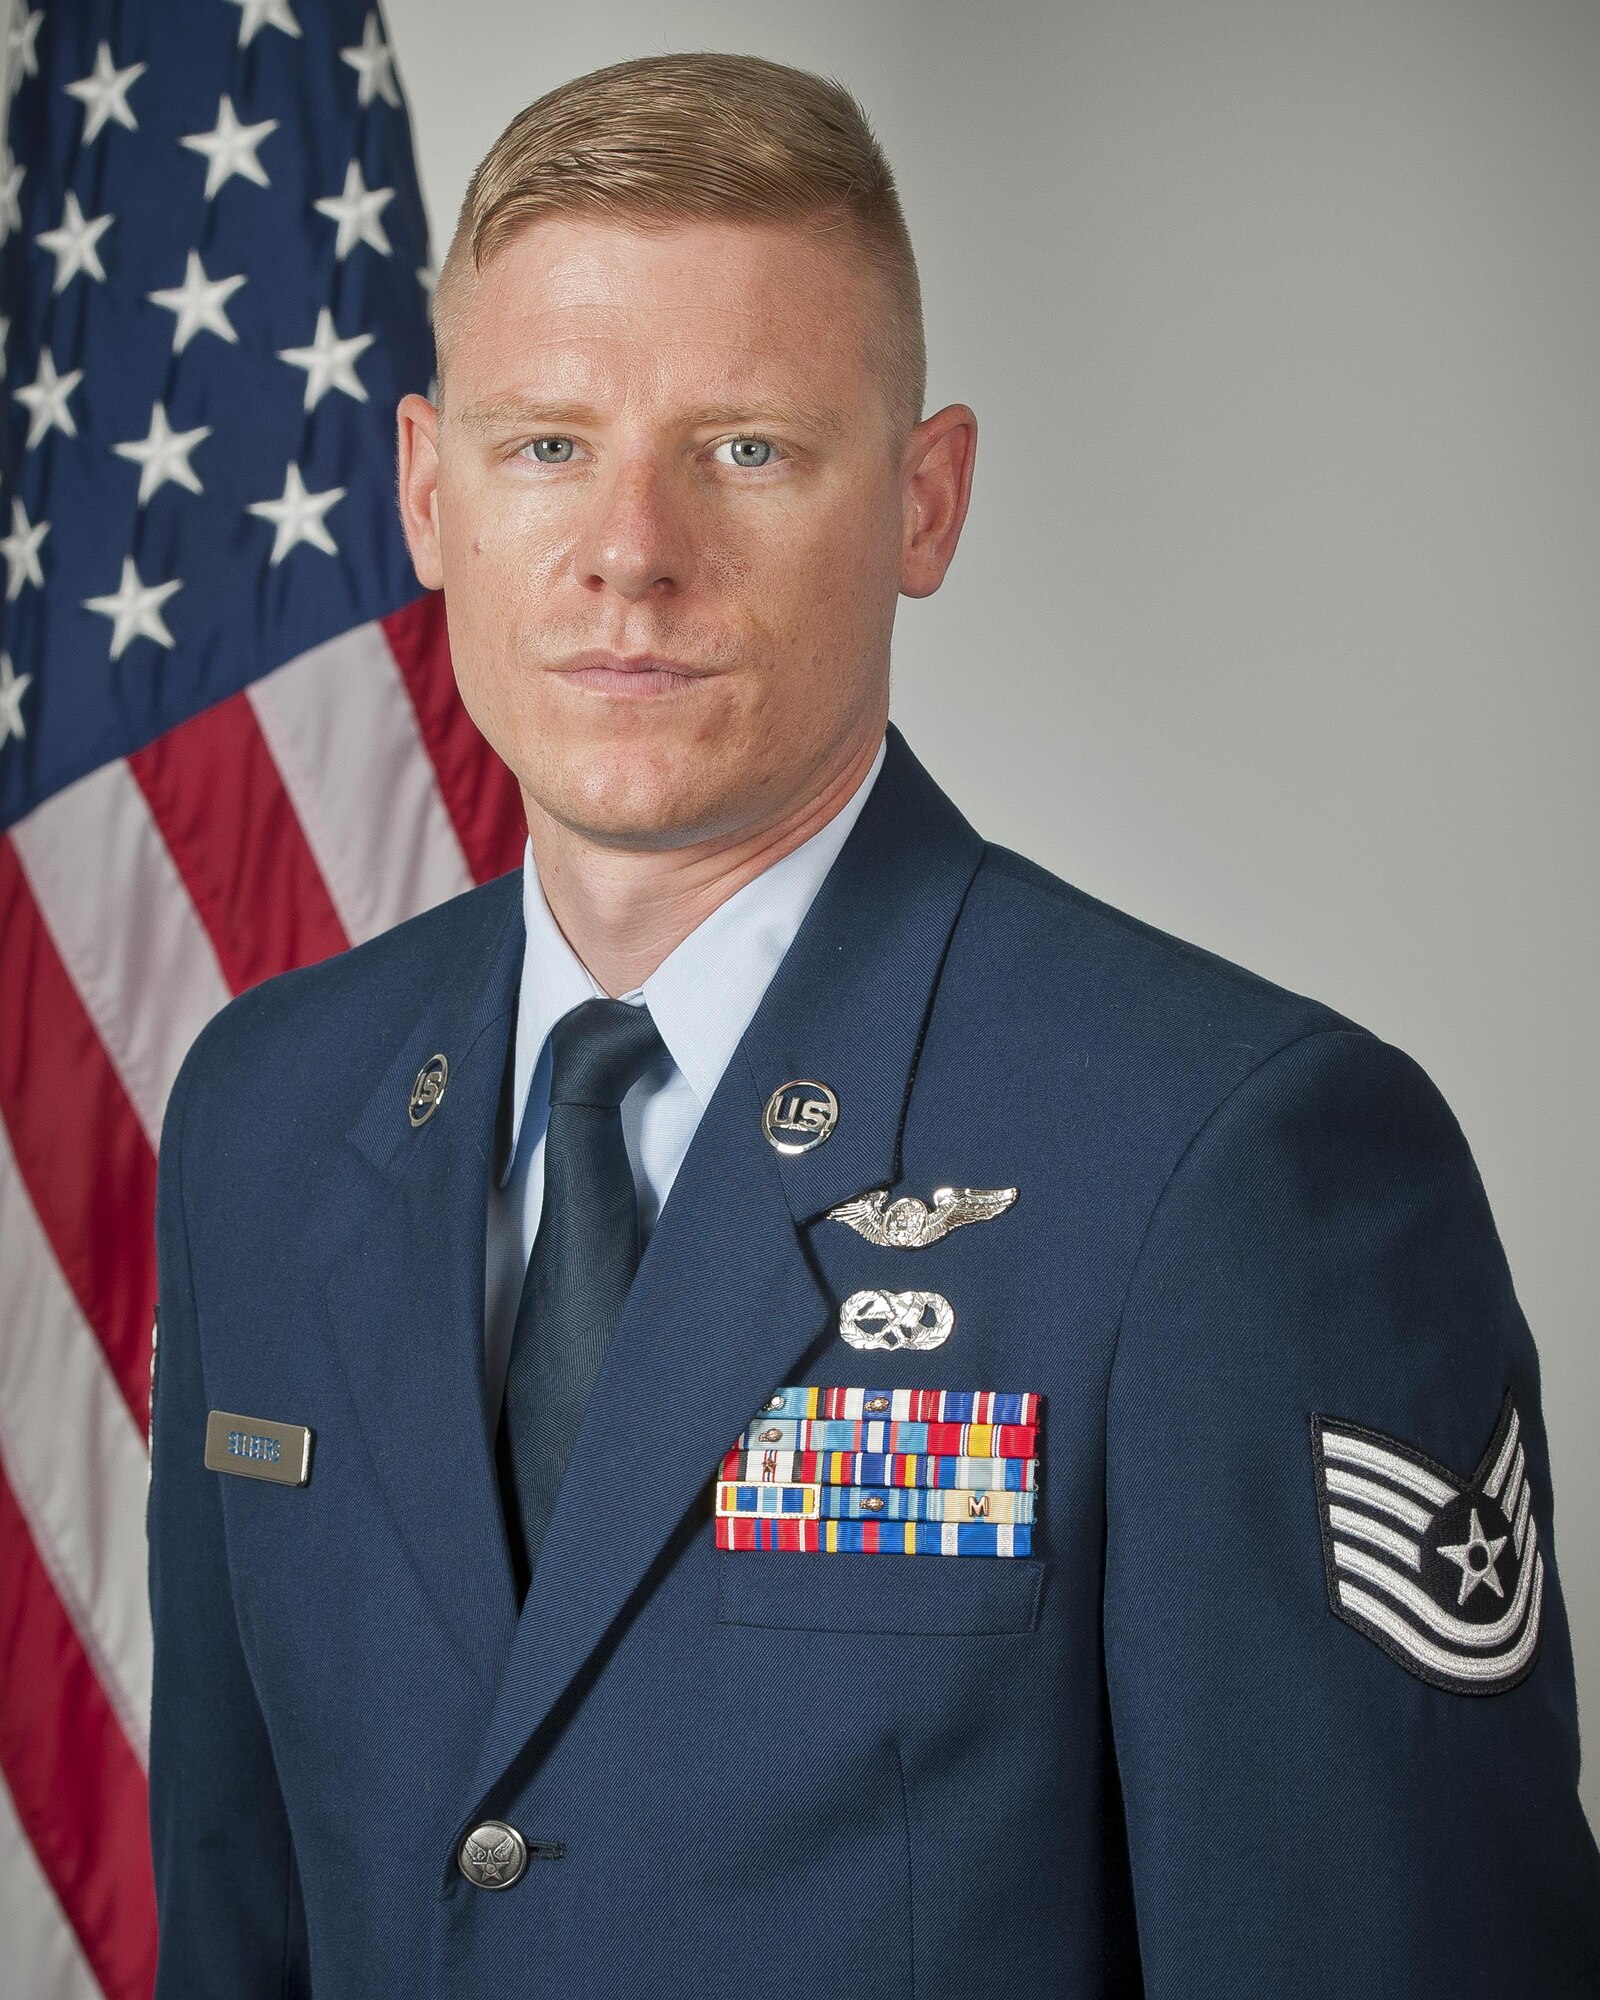 Tech. Sgt. Jason D. Selberg, the Air National Guard's 2016 Outstanding Noncommssioned Officer of the Year, poses for a photo at Joint Base Andrews, Md., May 31, 2017. Selberg is assigned to the 214th Reconnaissance Squadron, Arizona ANG, and was also named one of the U.S. Air Force's 12 Outstanding Airmen of the Year, out of the 105,700 Airmen in the Air National Guard.